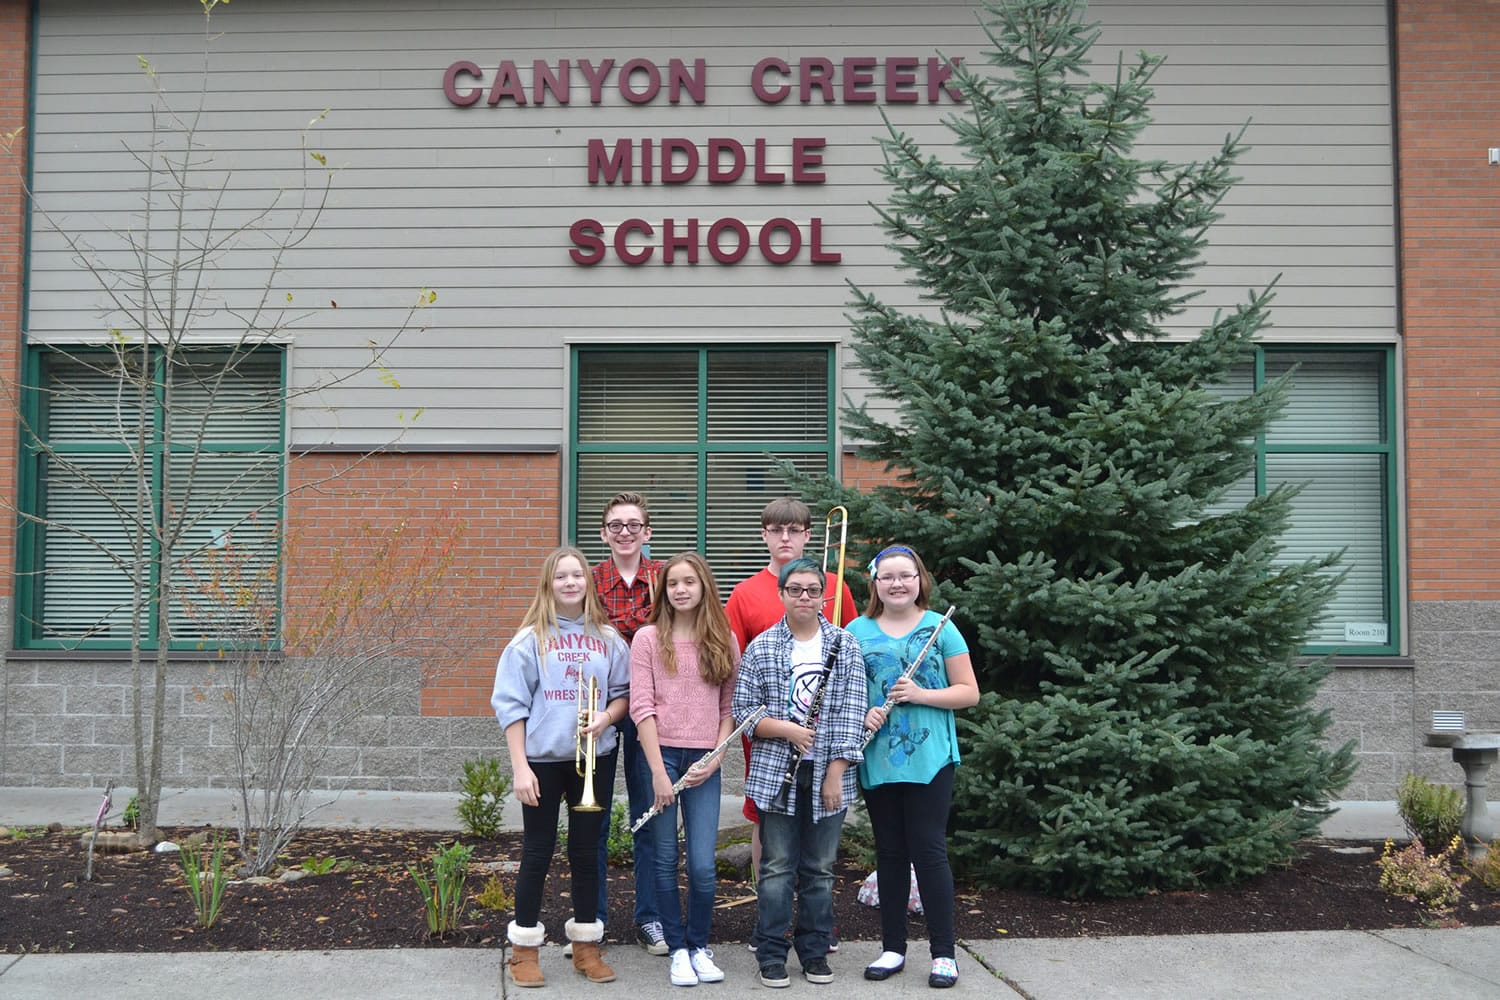 Washougal: Canyon Creek musicians Maddie Wakefield, front from left, Maliyah Veale, Jennie Mariscal, and Kelly Langston; back from left, William Weihl and Kyle Hendrickson were named to the North County Middle School Honor Band.